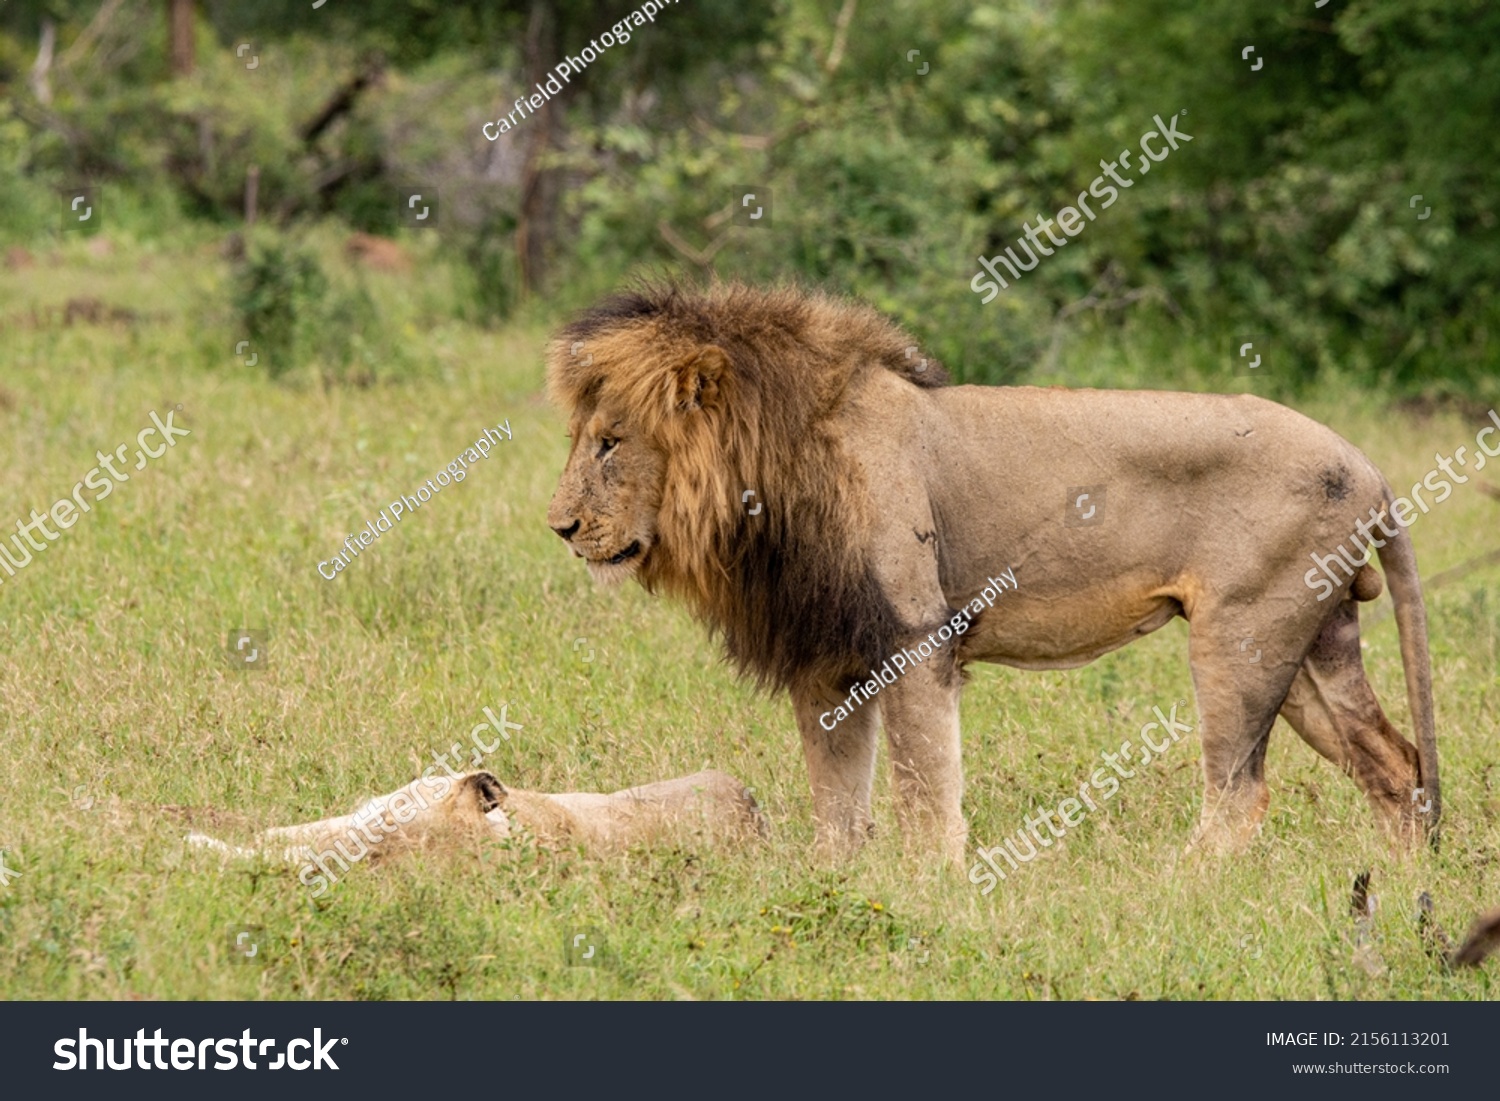 African Lions On Mating Display Stock Photo 2156113201 | Shutterstock